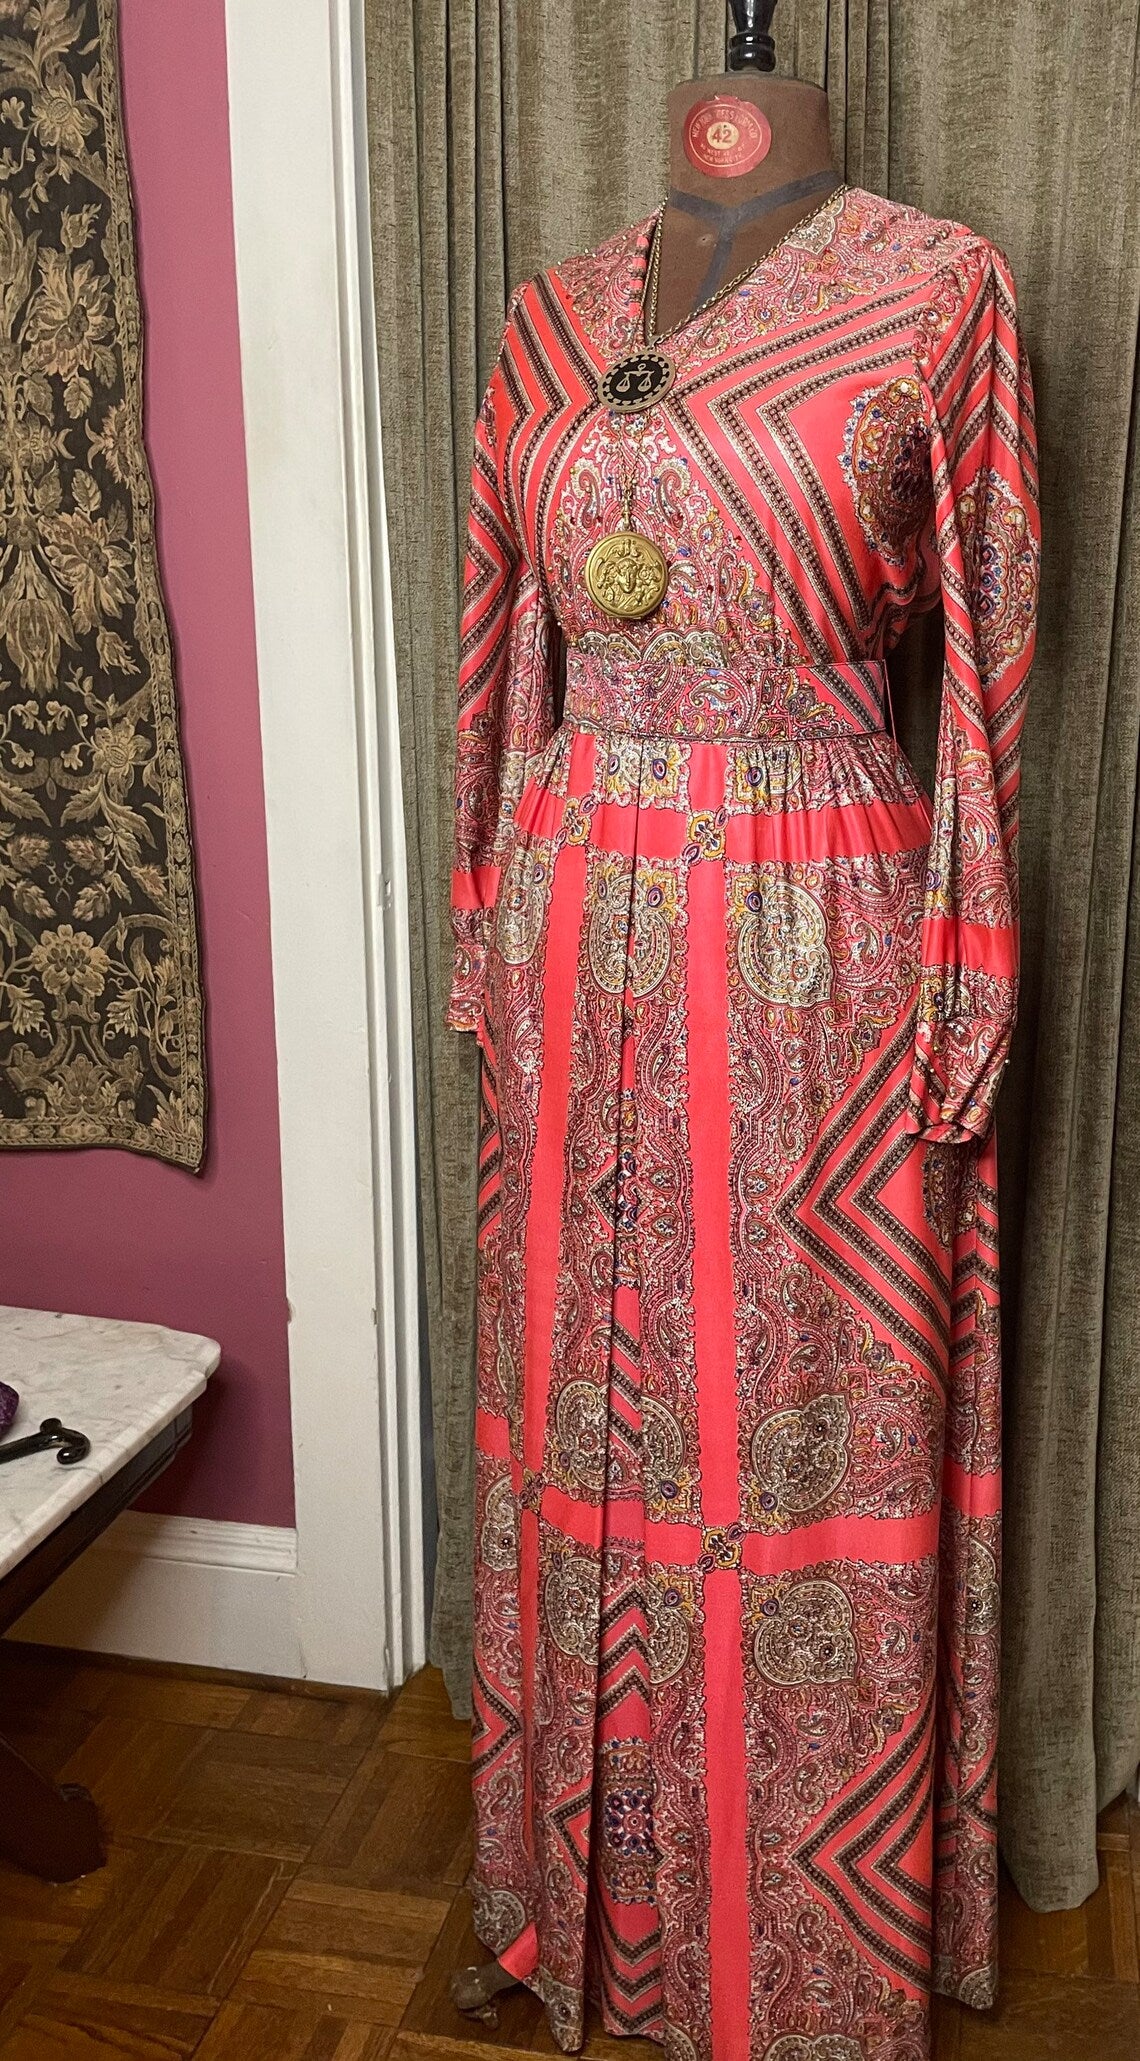 Vintage 1970s Psychedlic Hot Pink Paisley Dress by Bernie Bee Size 10 to 12